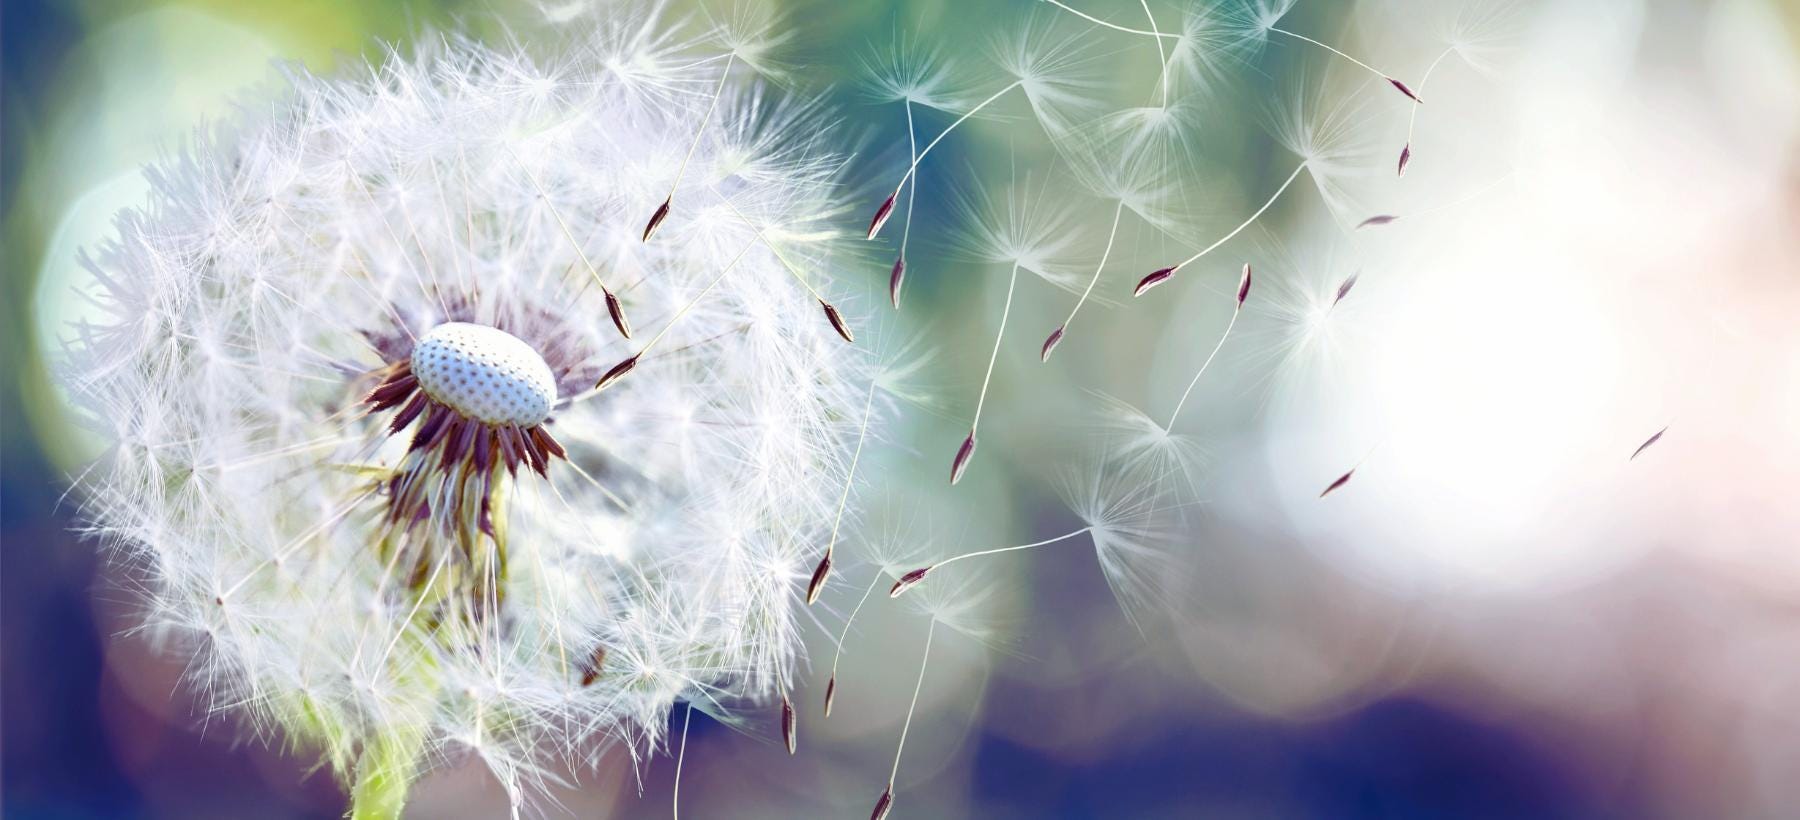 Image of dandelion thistle blowing away